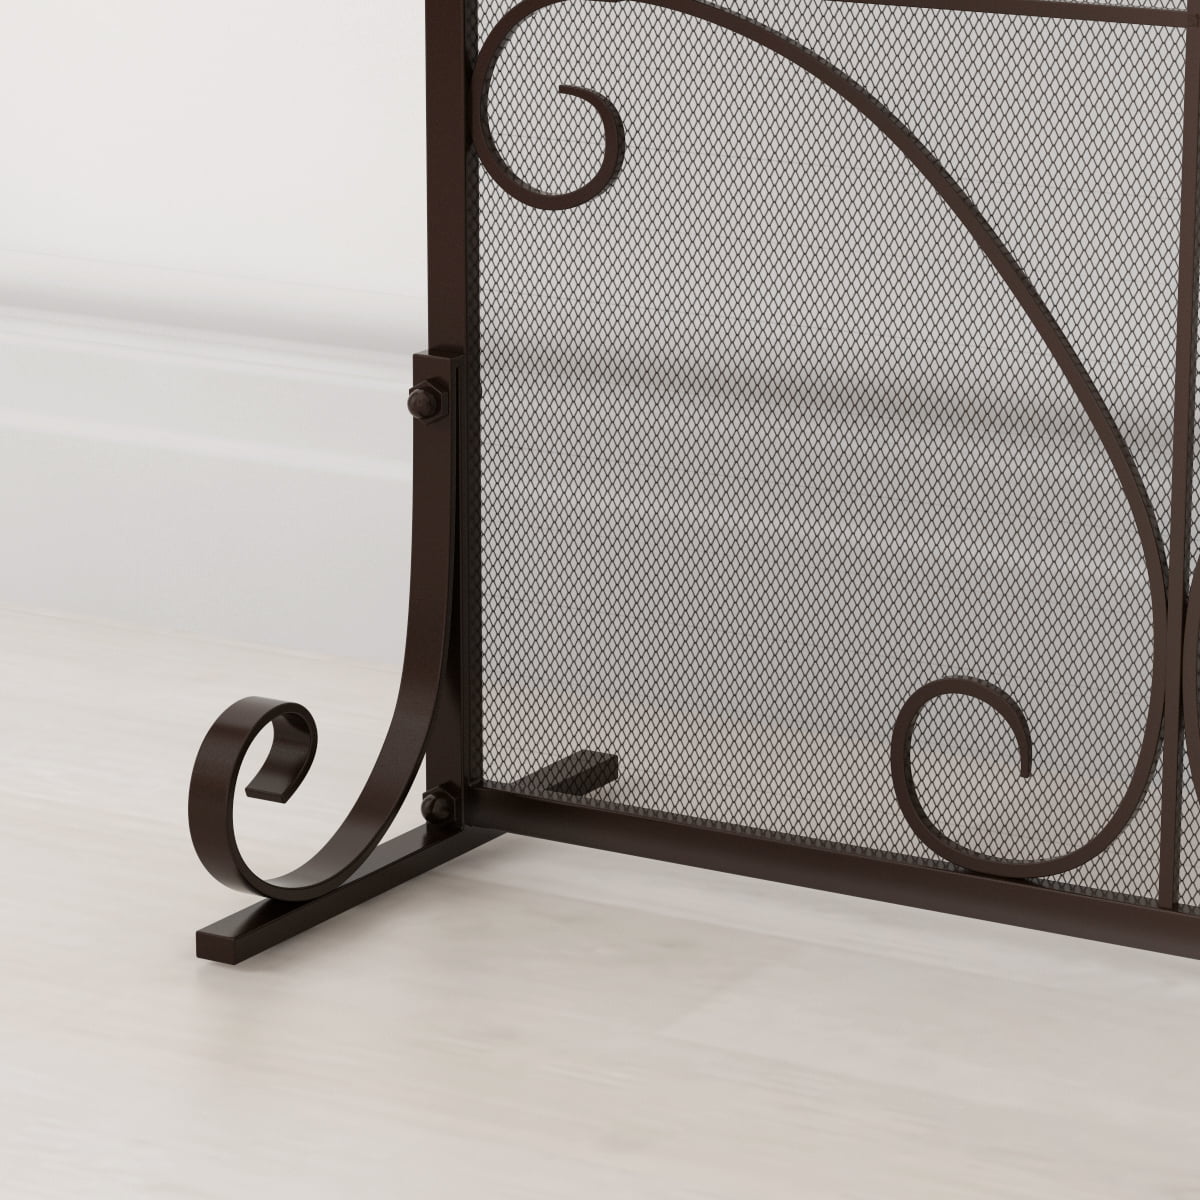 Decor Scroll Design Heavy Duty Wrought Iron Fireplace Screen with Doors 97cm Wide Black Sparks Guard and Baby Proof